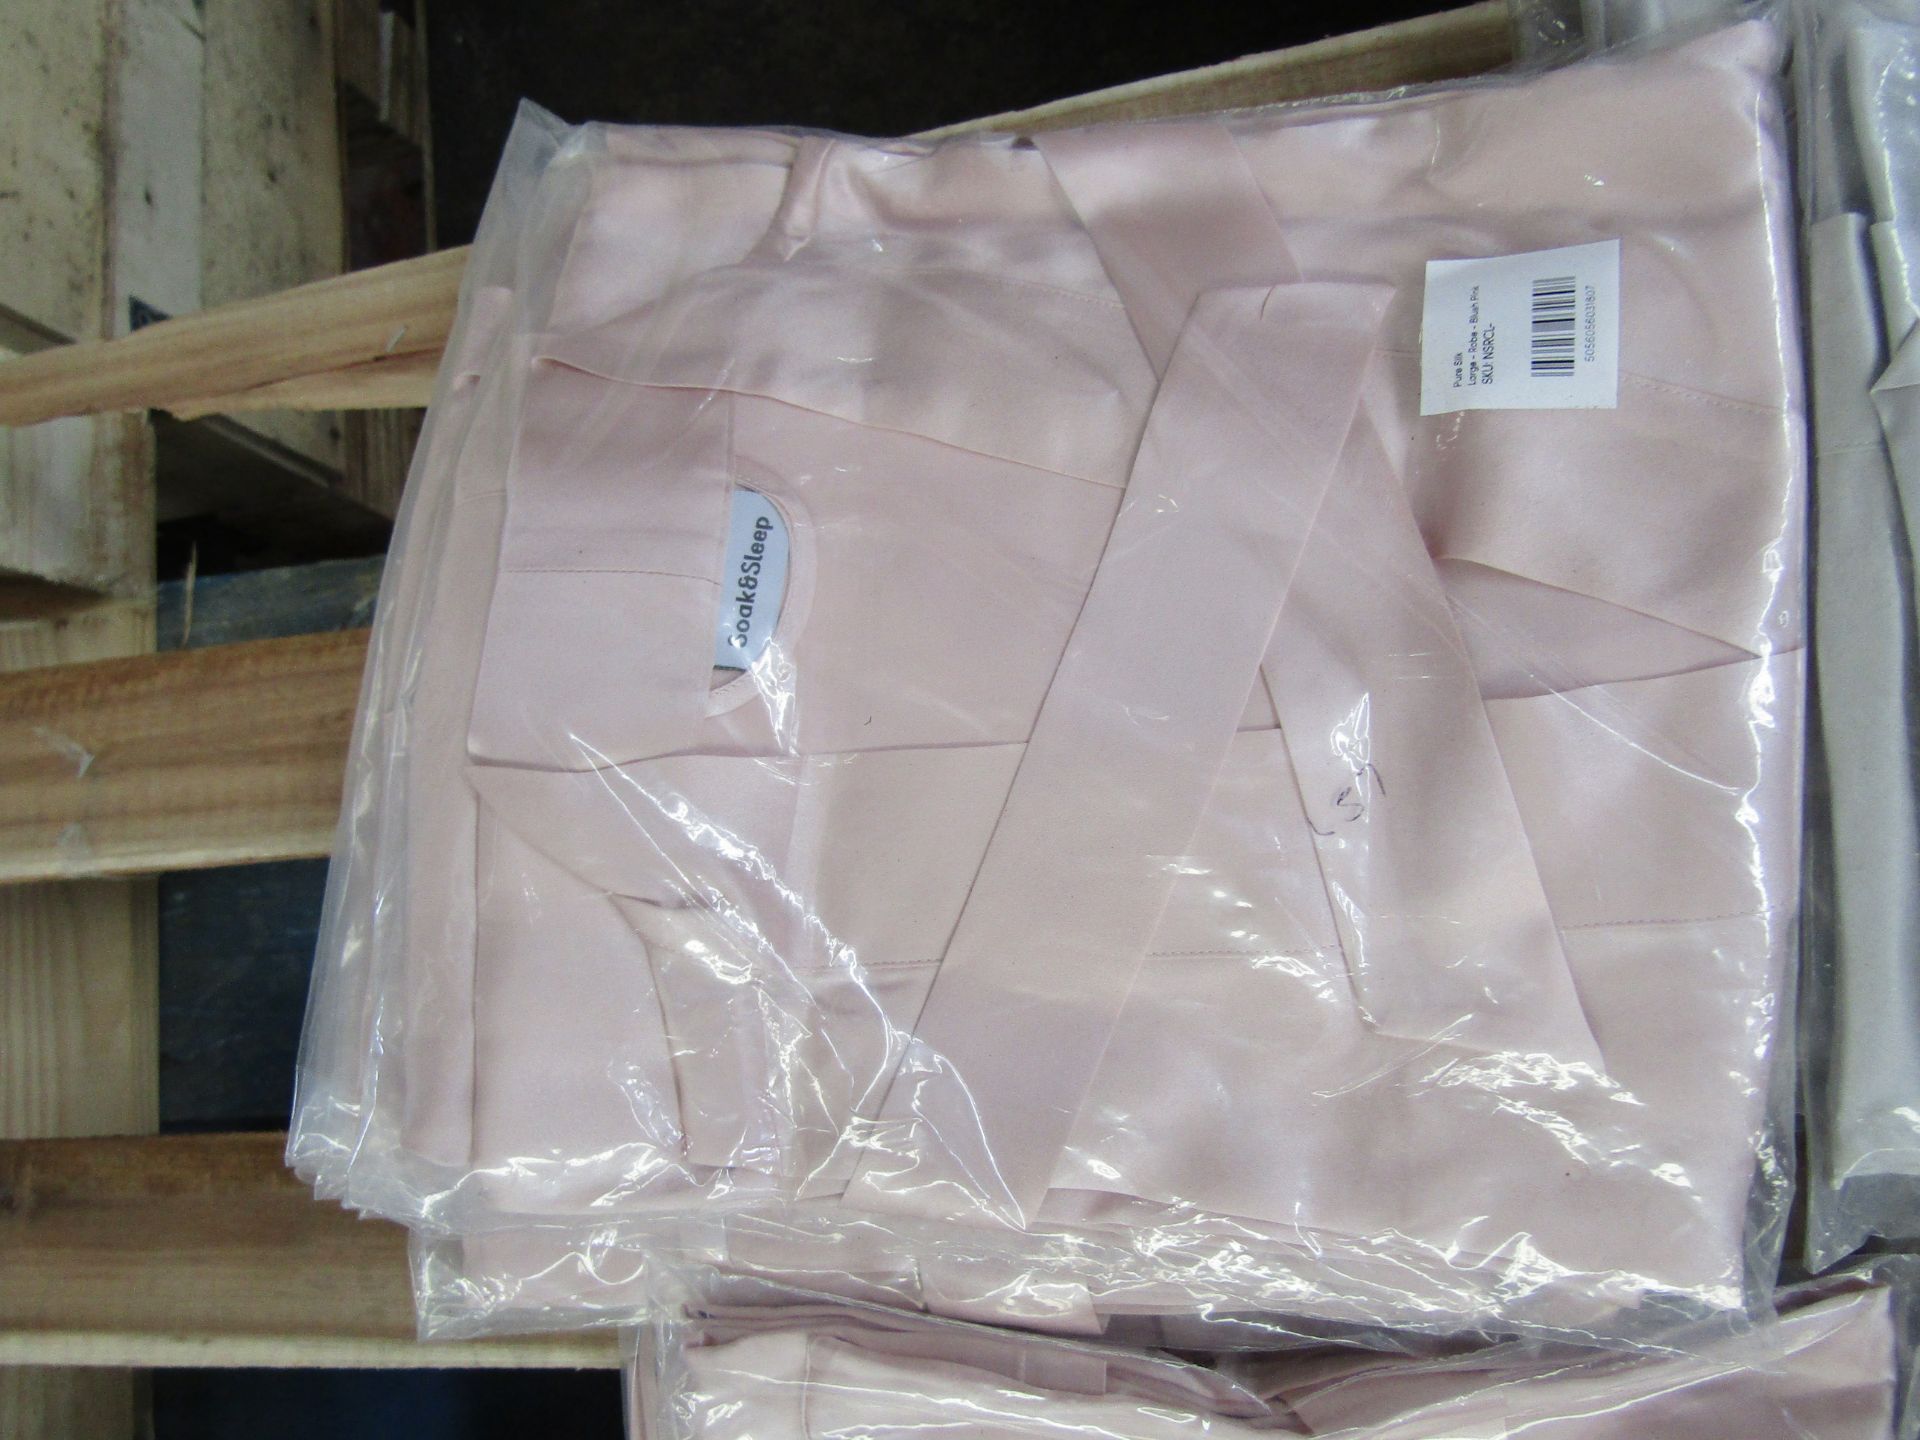 Soak & Sleep Blush Pink Pure Silk Large Robe RRP 70 Wrap yourself in irresistable luxury and relax